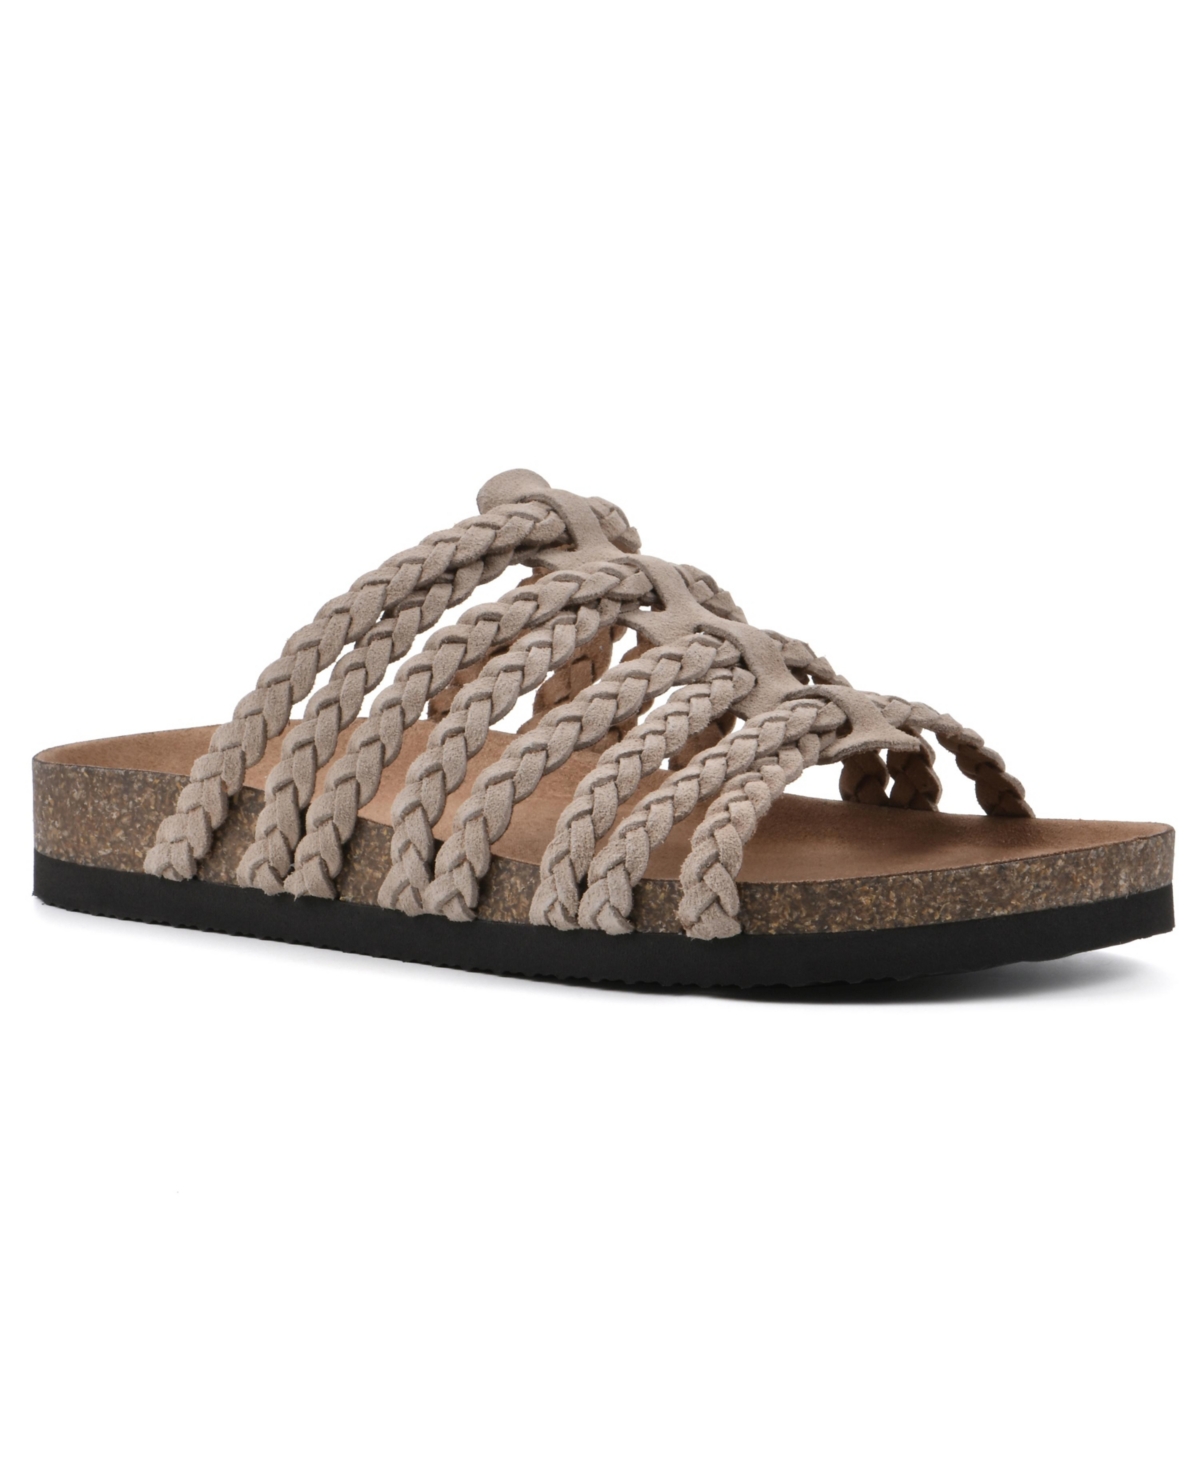 Women's Hamza Footbed Sandals - Brown, Leather